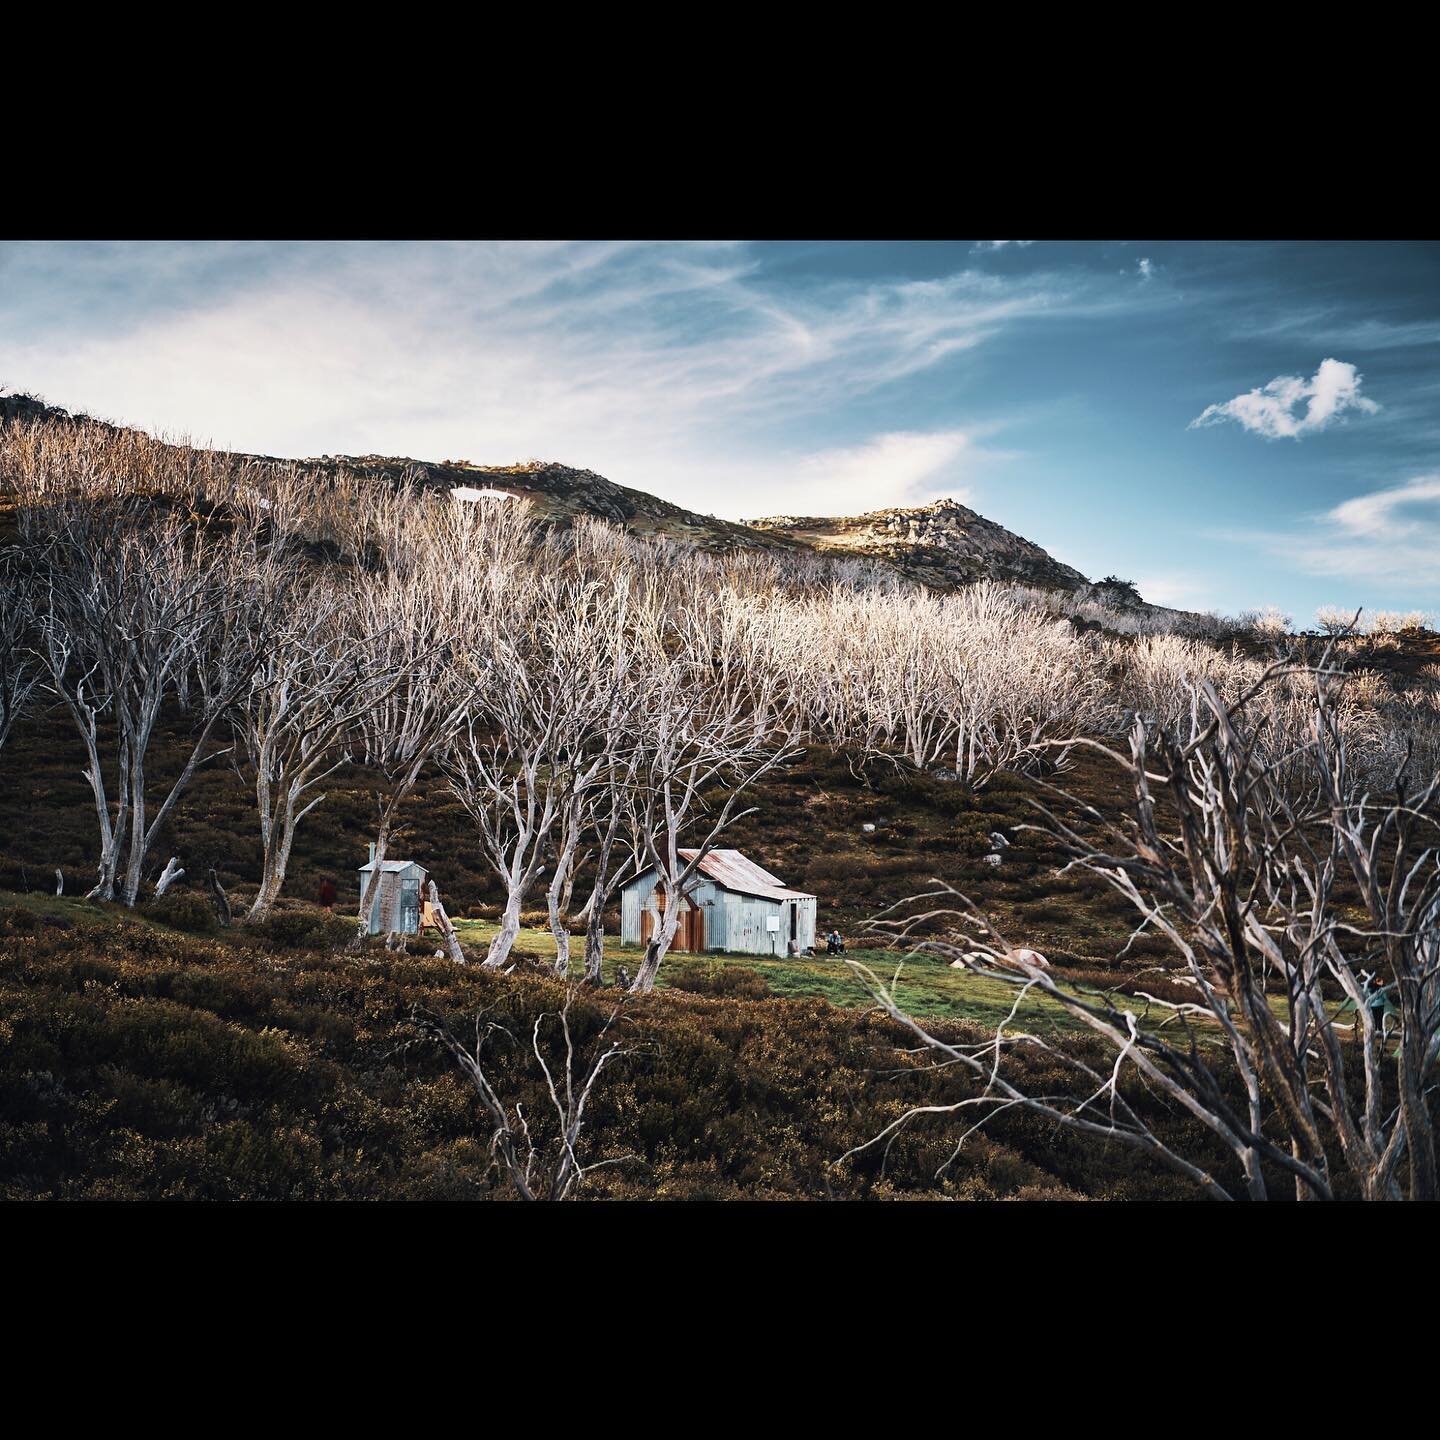 A solo-ramble out to Whites River Hut last weekend. The landscape remains scarred from 2003 fires, 17 years on. 

Subscribe to my blog via my website. Link in bio.
15% off print orders over 100 bucks, just enter FRIDAY20 at the checkout. Valid &lsquo